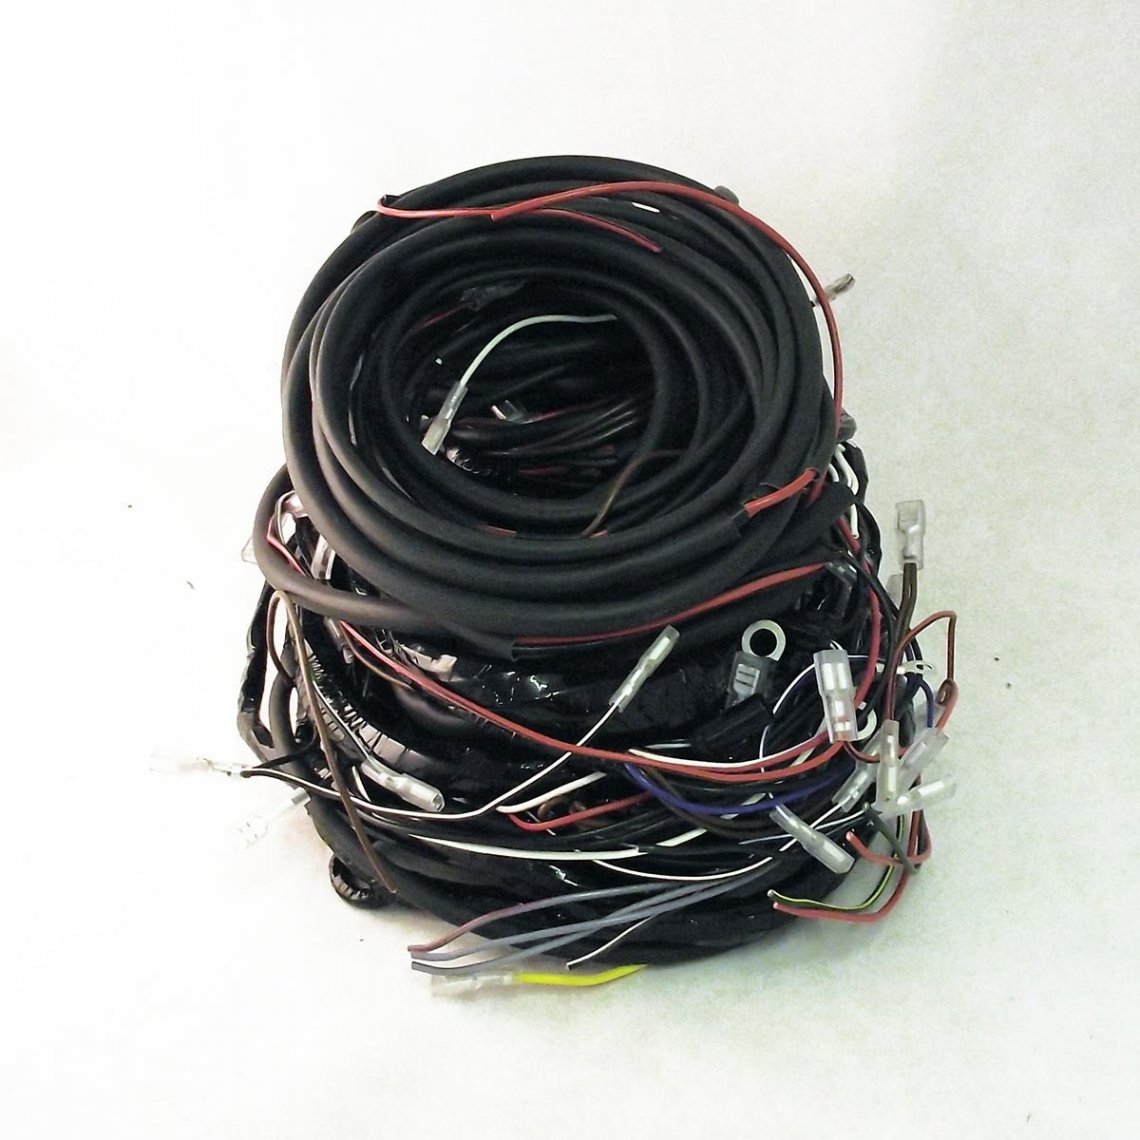 Porsche 911 wiring loom set, valid for models from 1971 - 1973